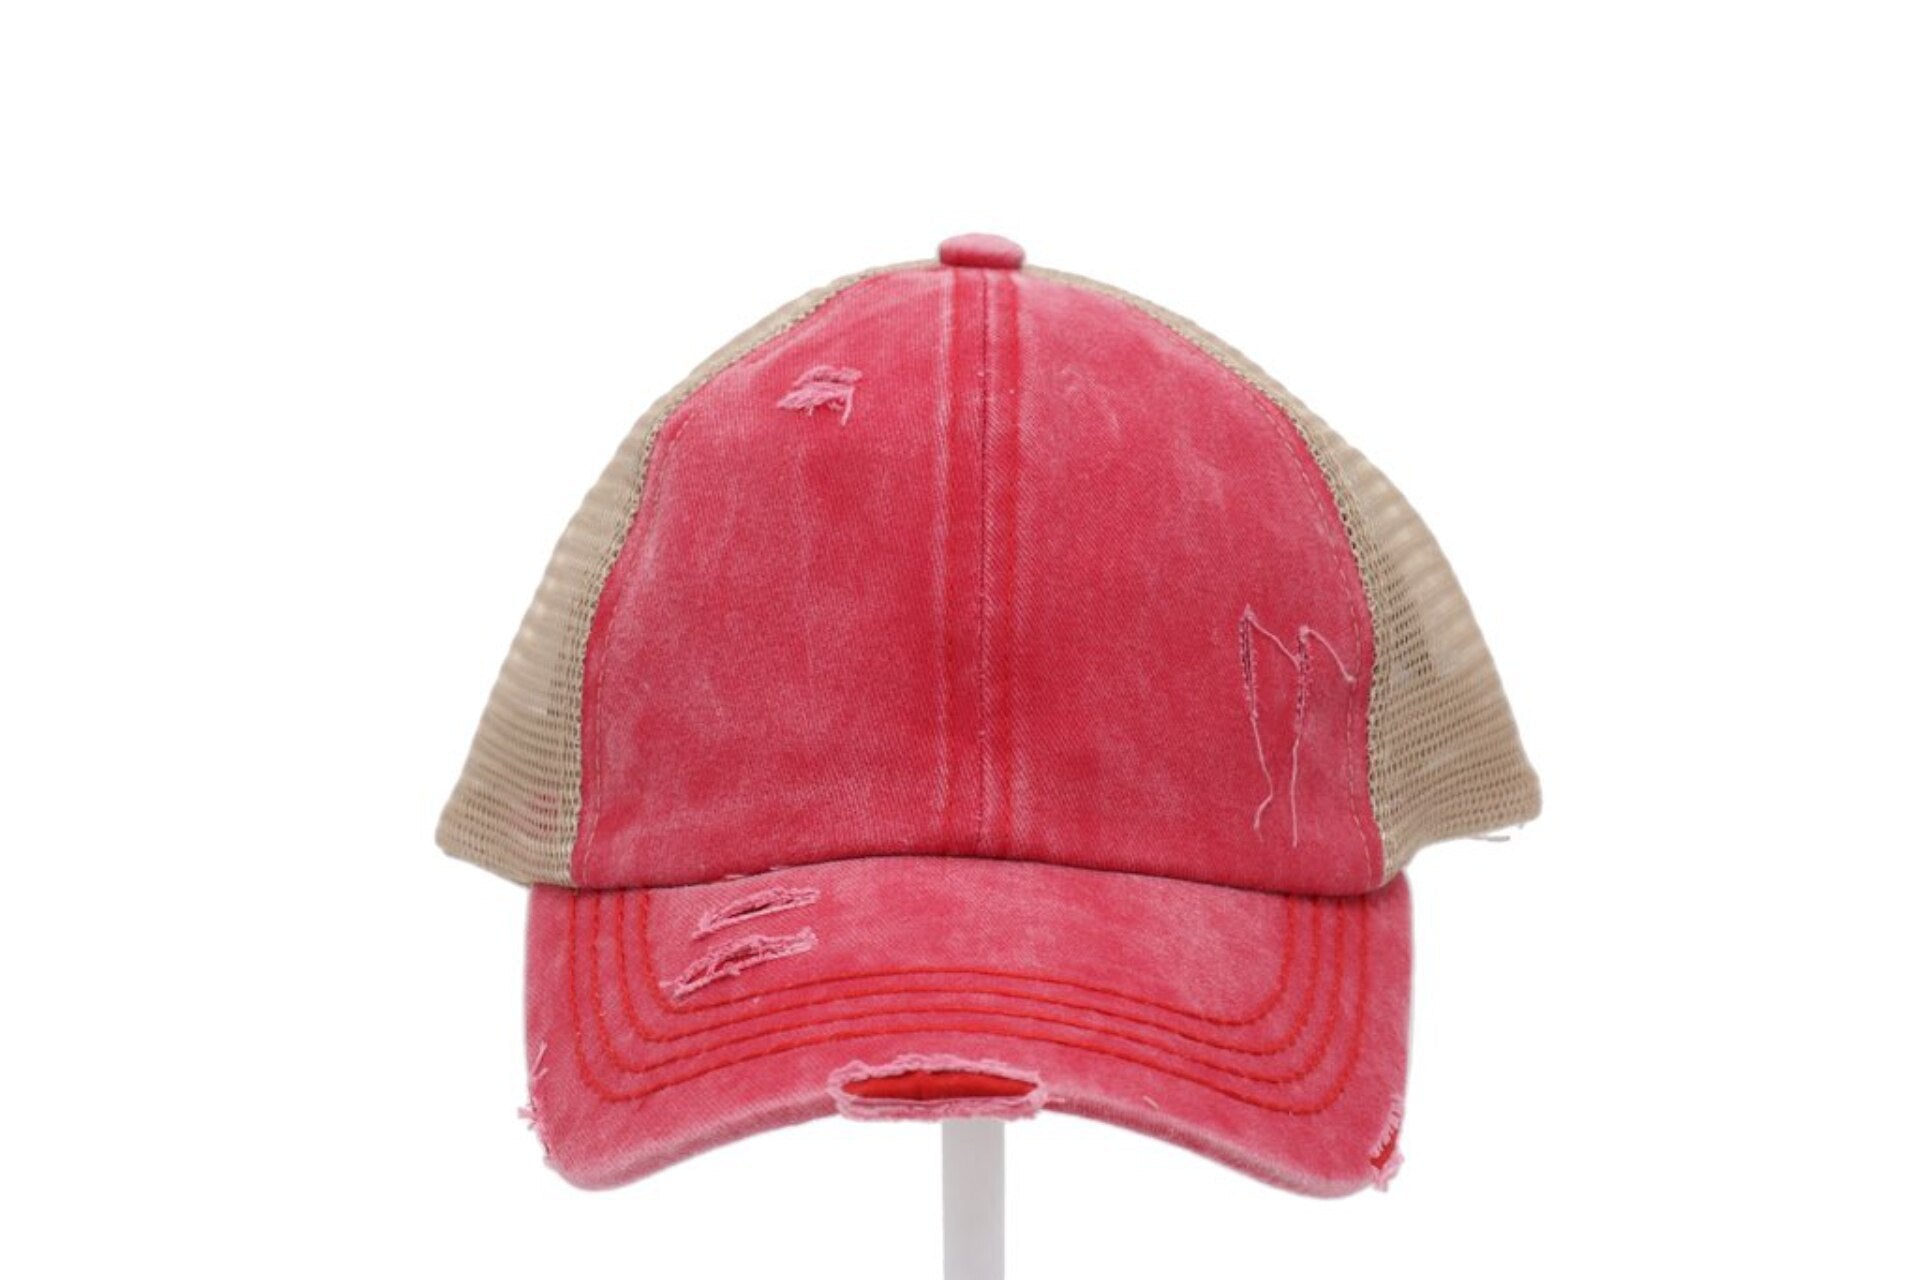 CC Washed Denim Criss Cross High Pony Ball Cap - The Graphic Tee